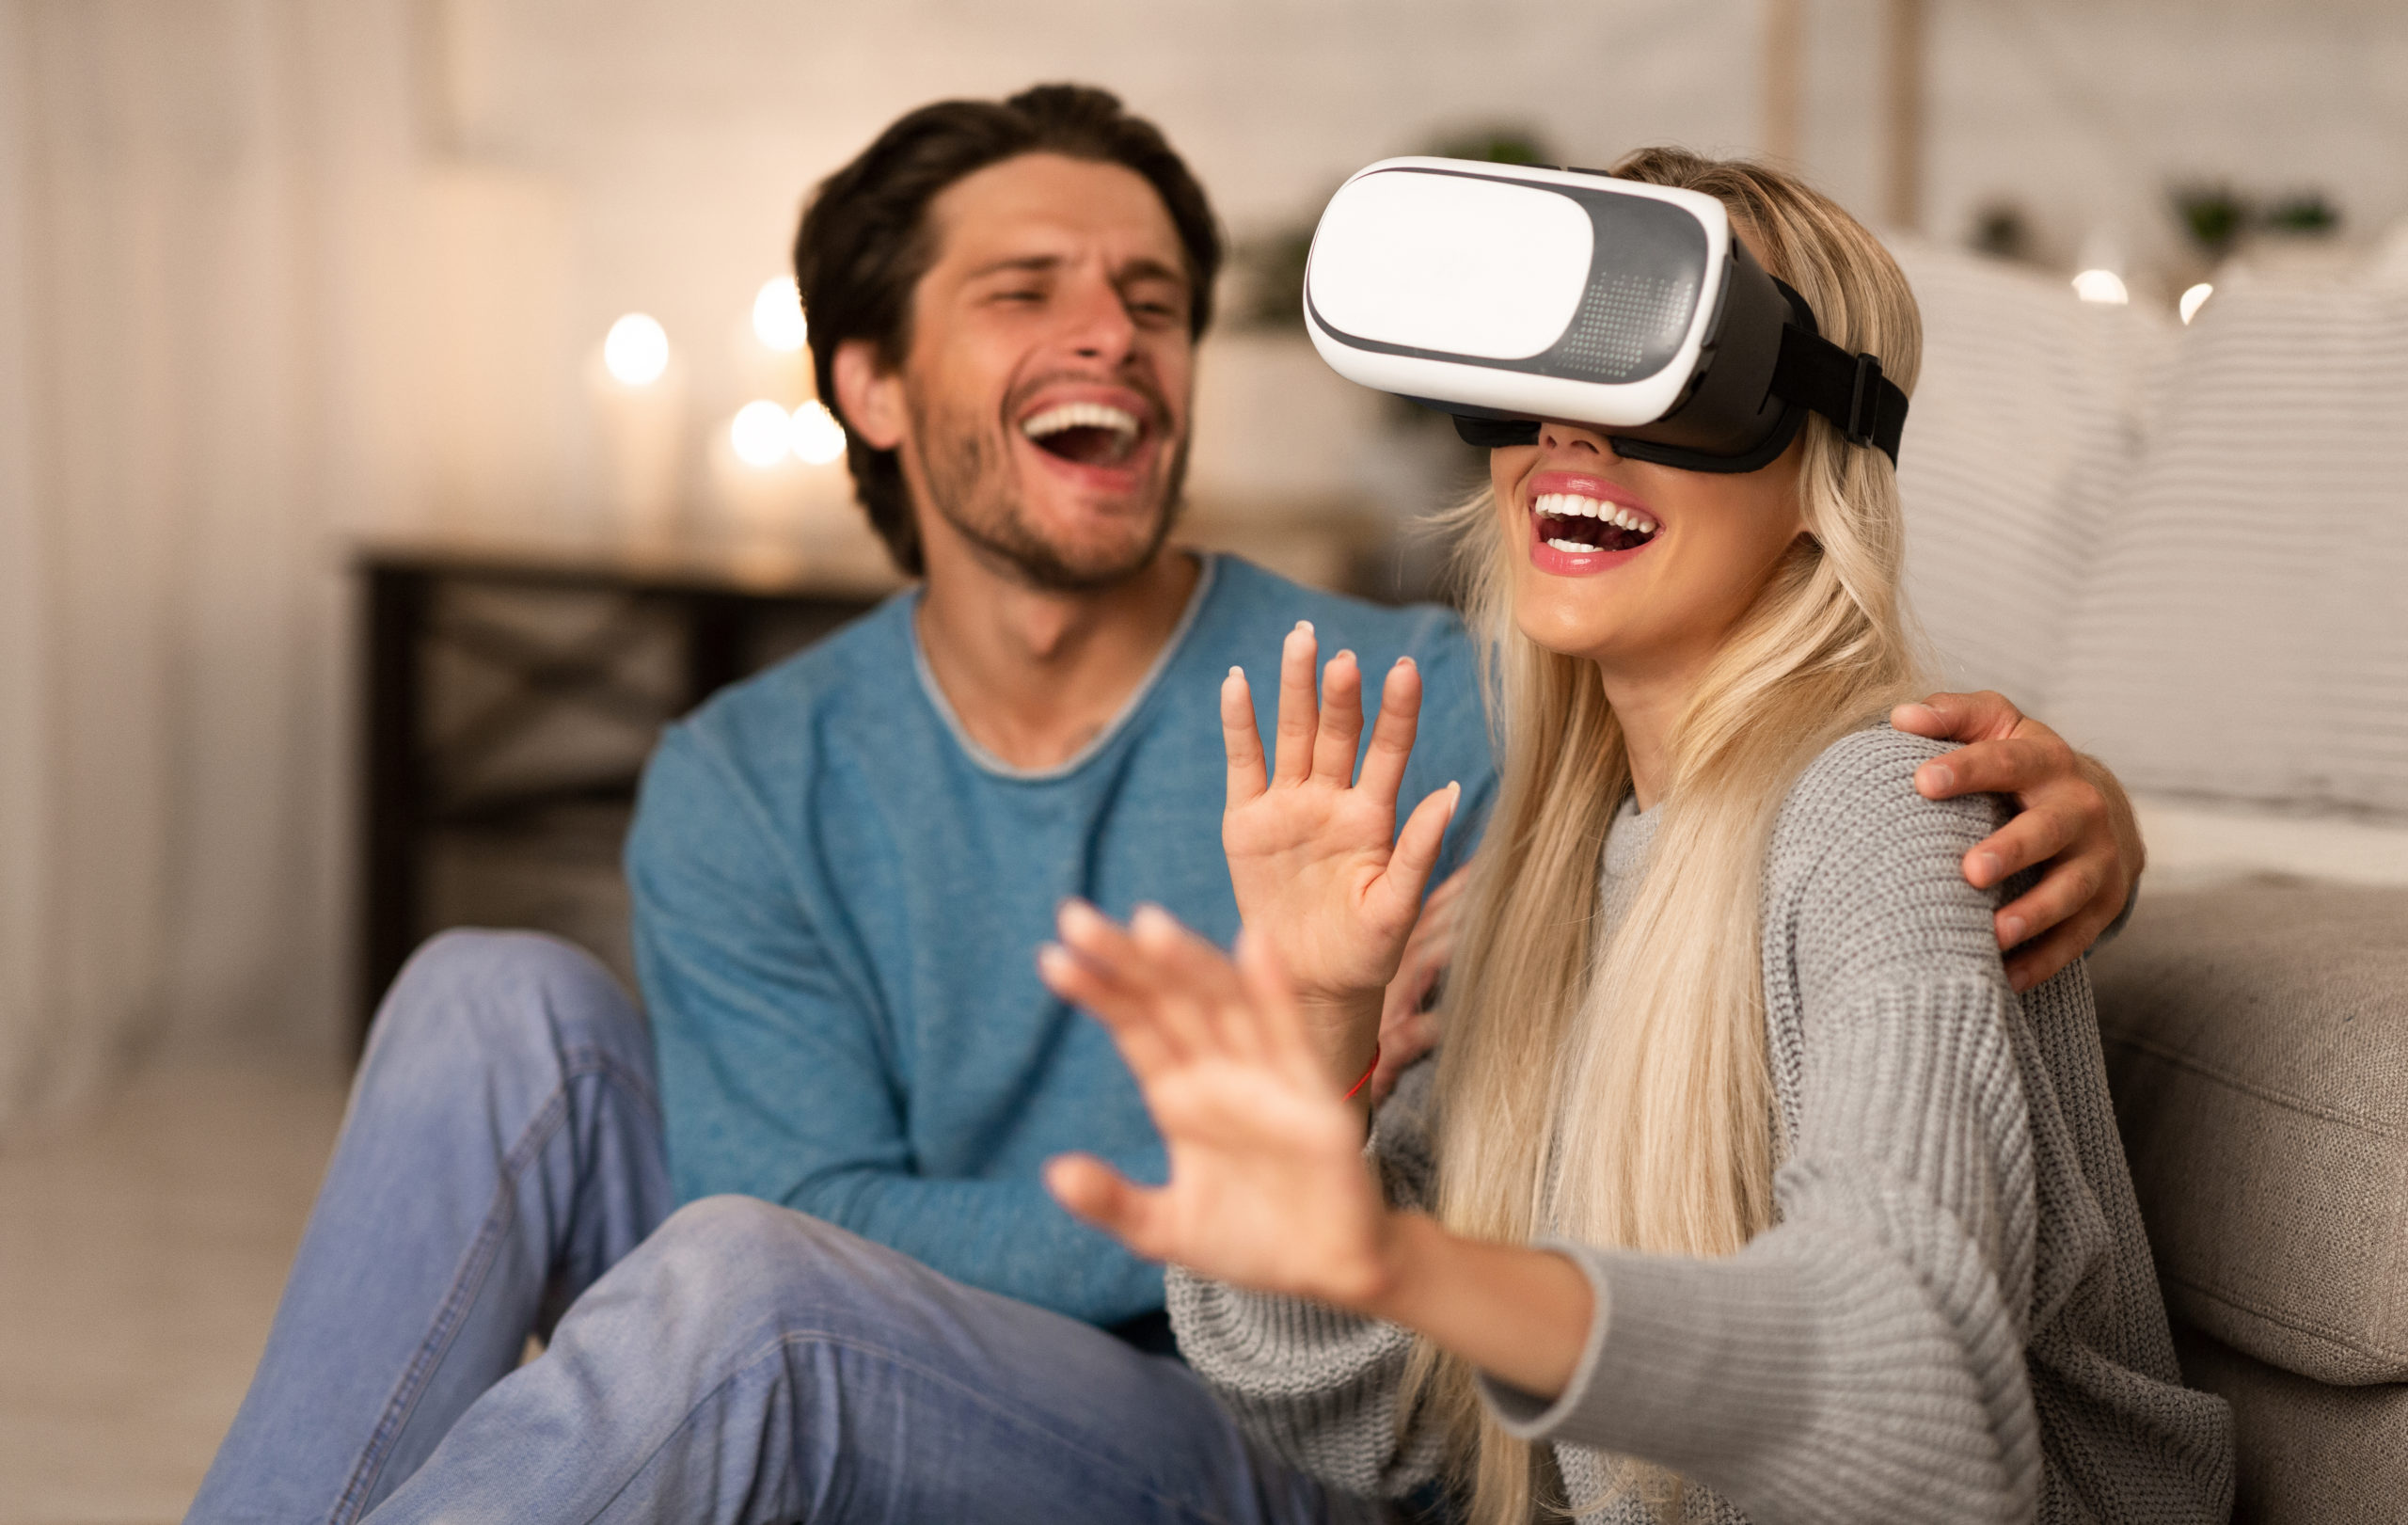 Modern Date. Millennial Couple Using VR Headset Experiencing Virtual Reality At Home At Night.